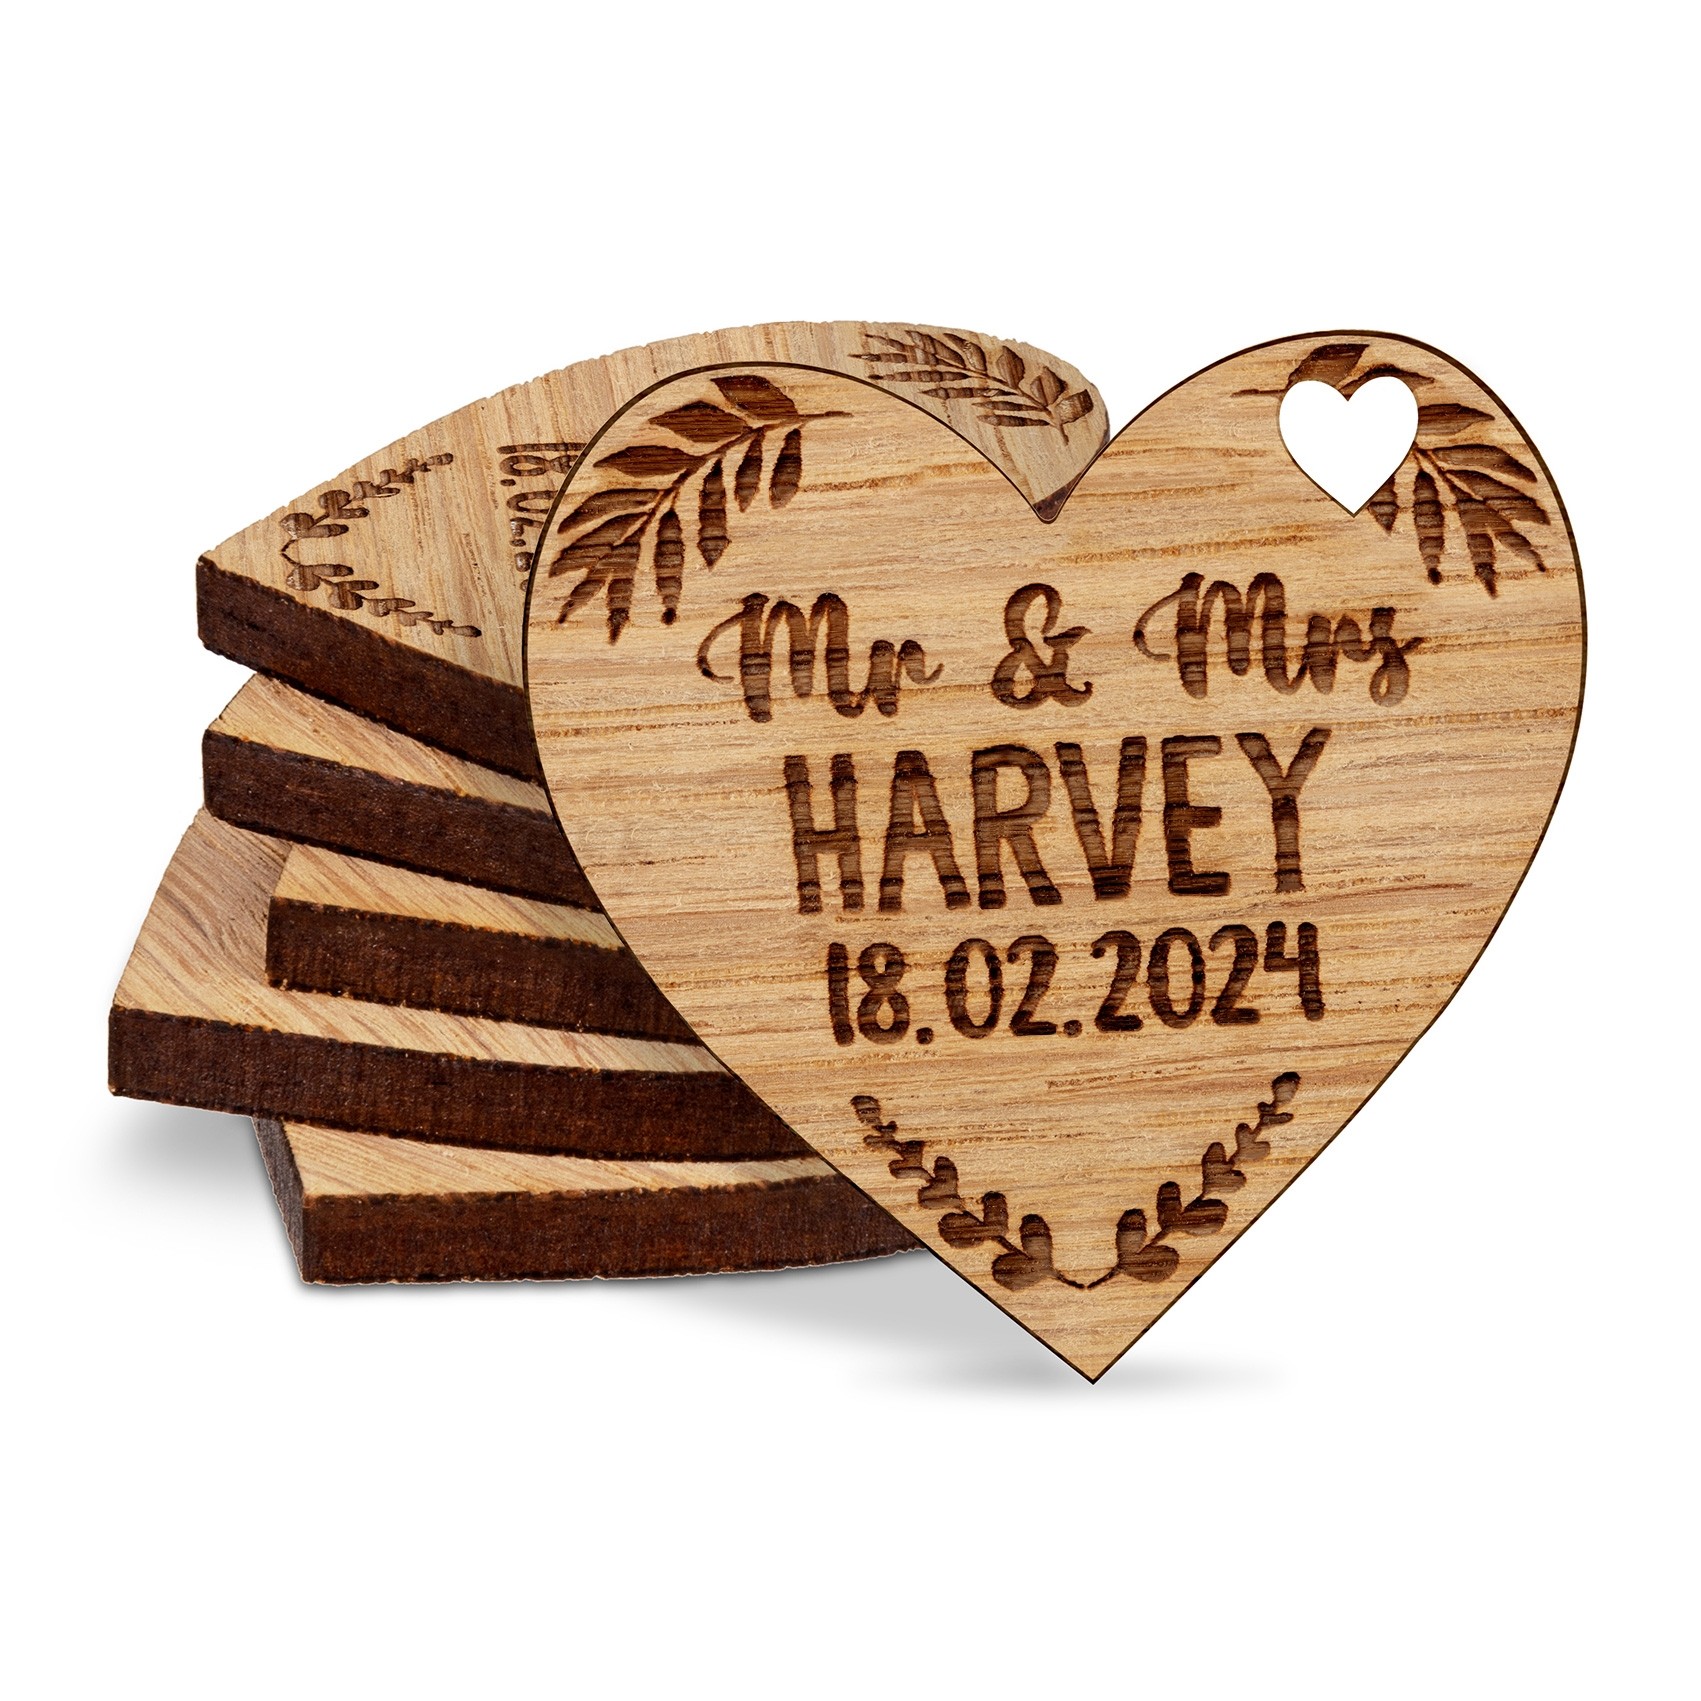 Personalised Mr & Mrs Leaves Floral Love Hearts Wedding Favours Table Decorations Wooden Confetti Scatters Charms Custom